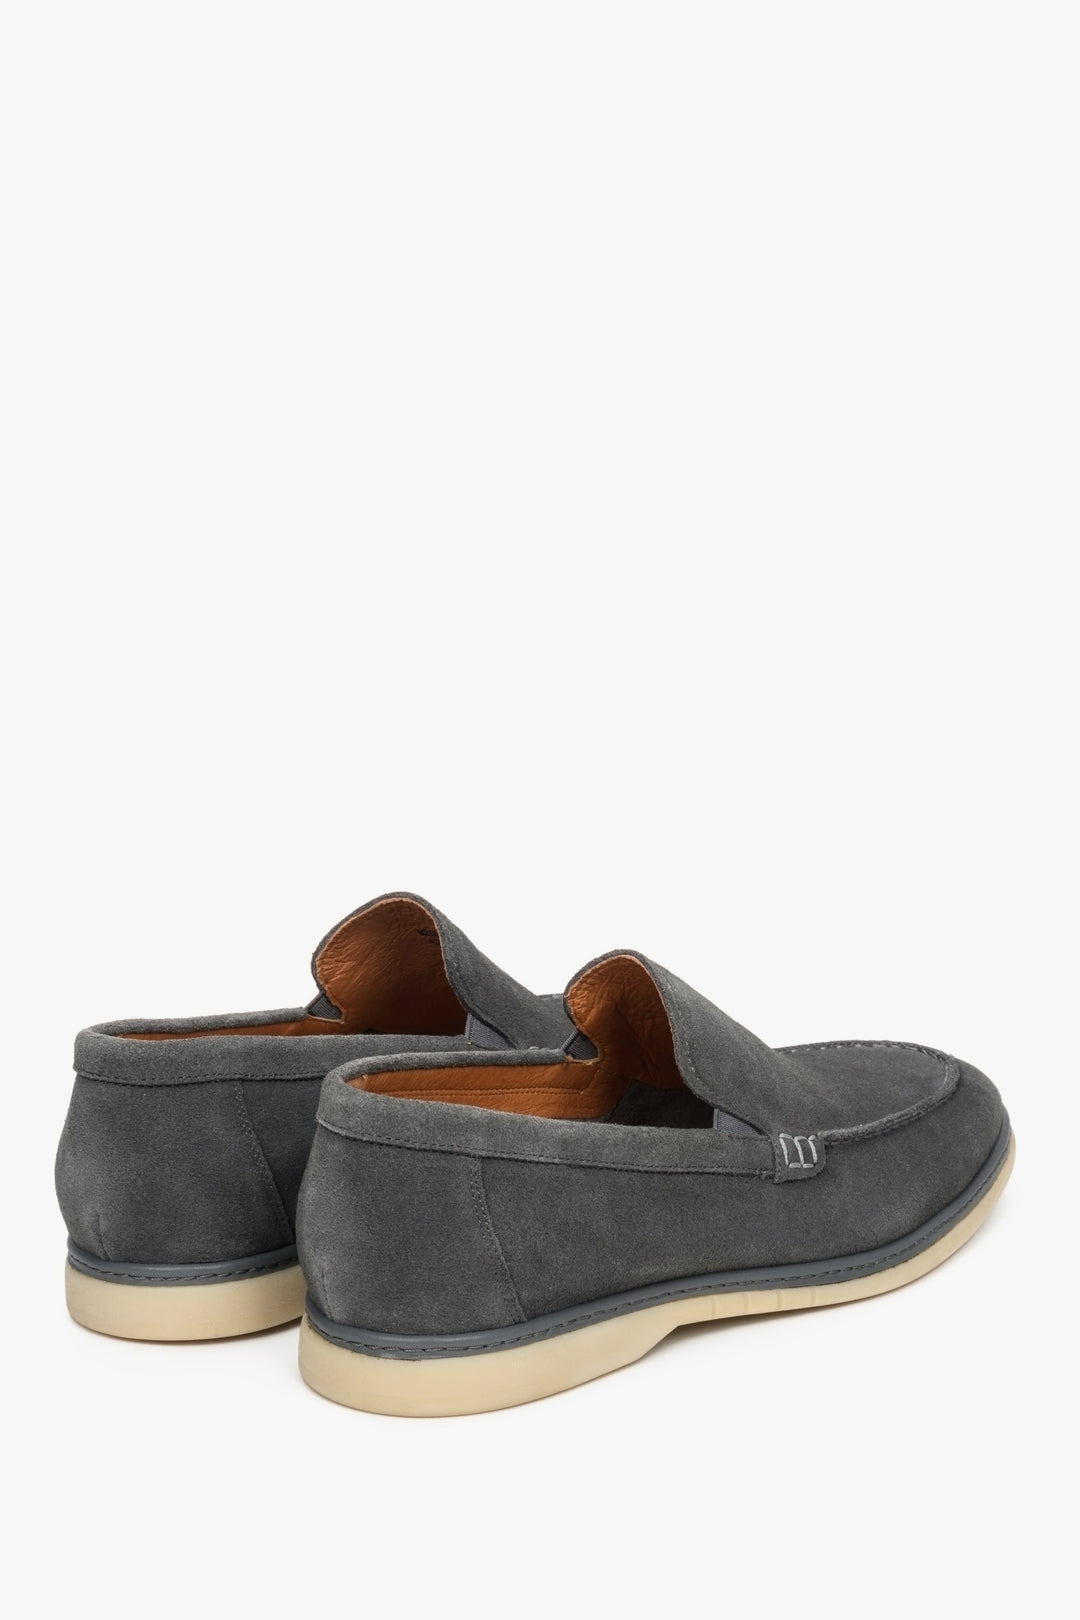 Men's grey velour loafers for spring - presentation of the heel and side seams.